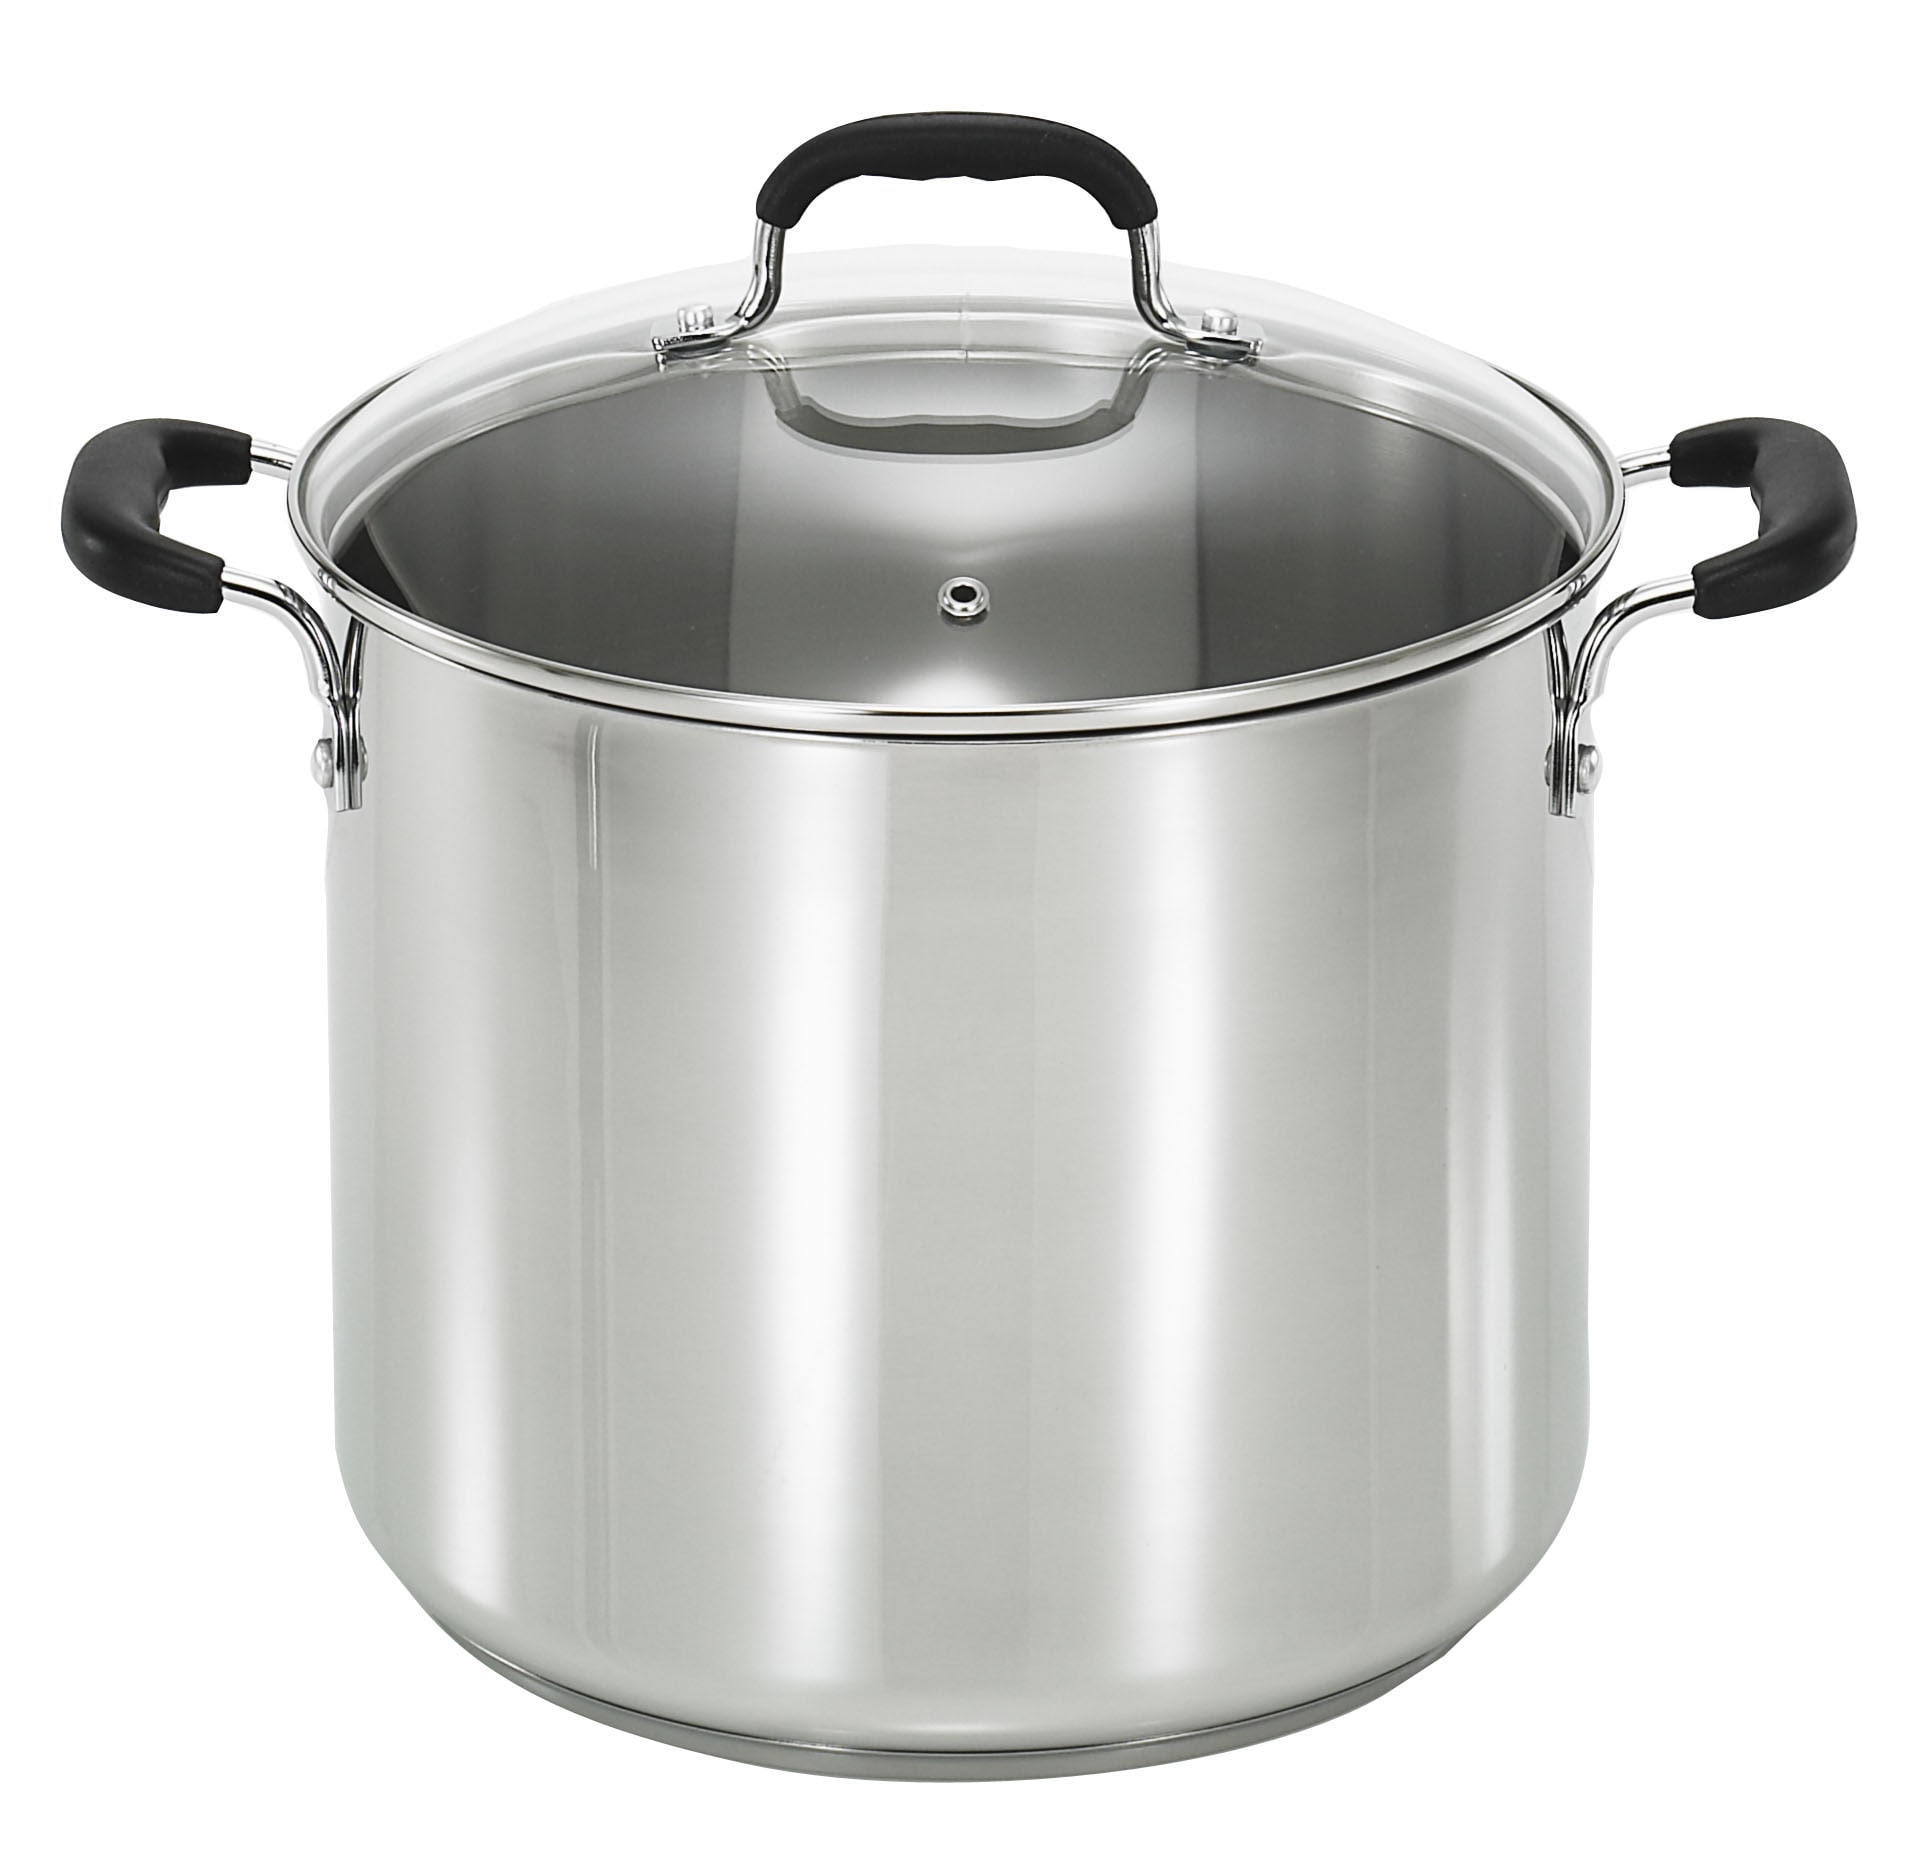 T-Fal Cook & Strain Stainless Steel Cookware, Saucepan with Lid, 1.5 Quart